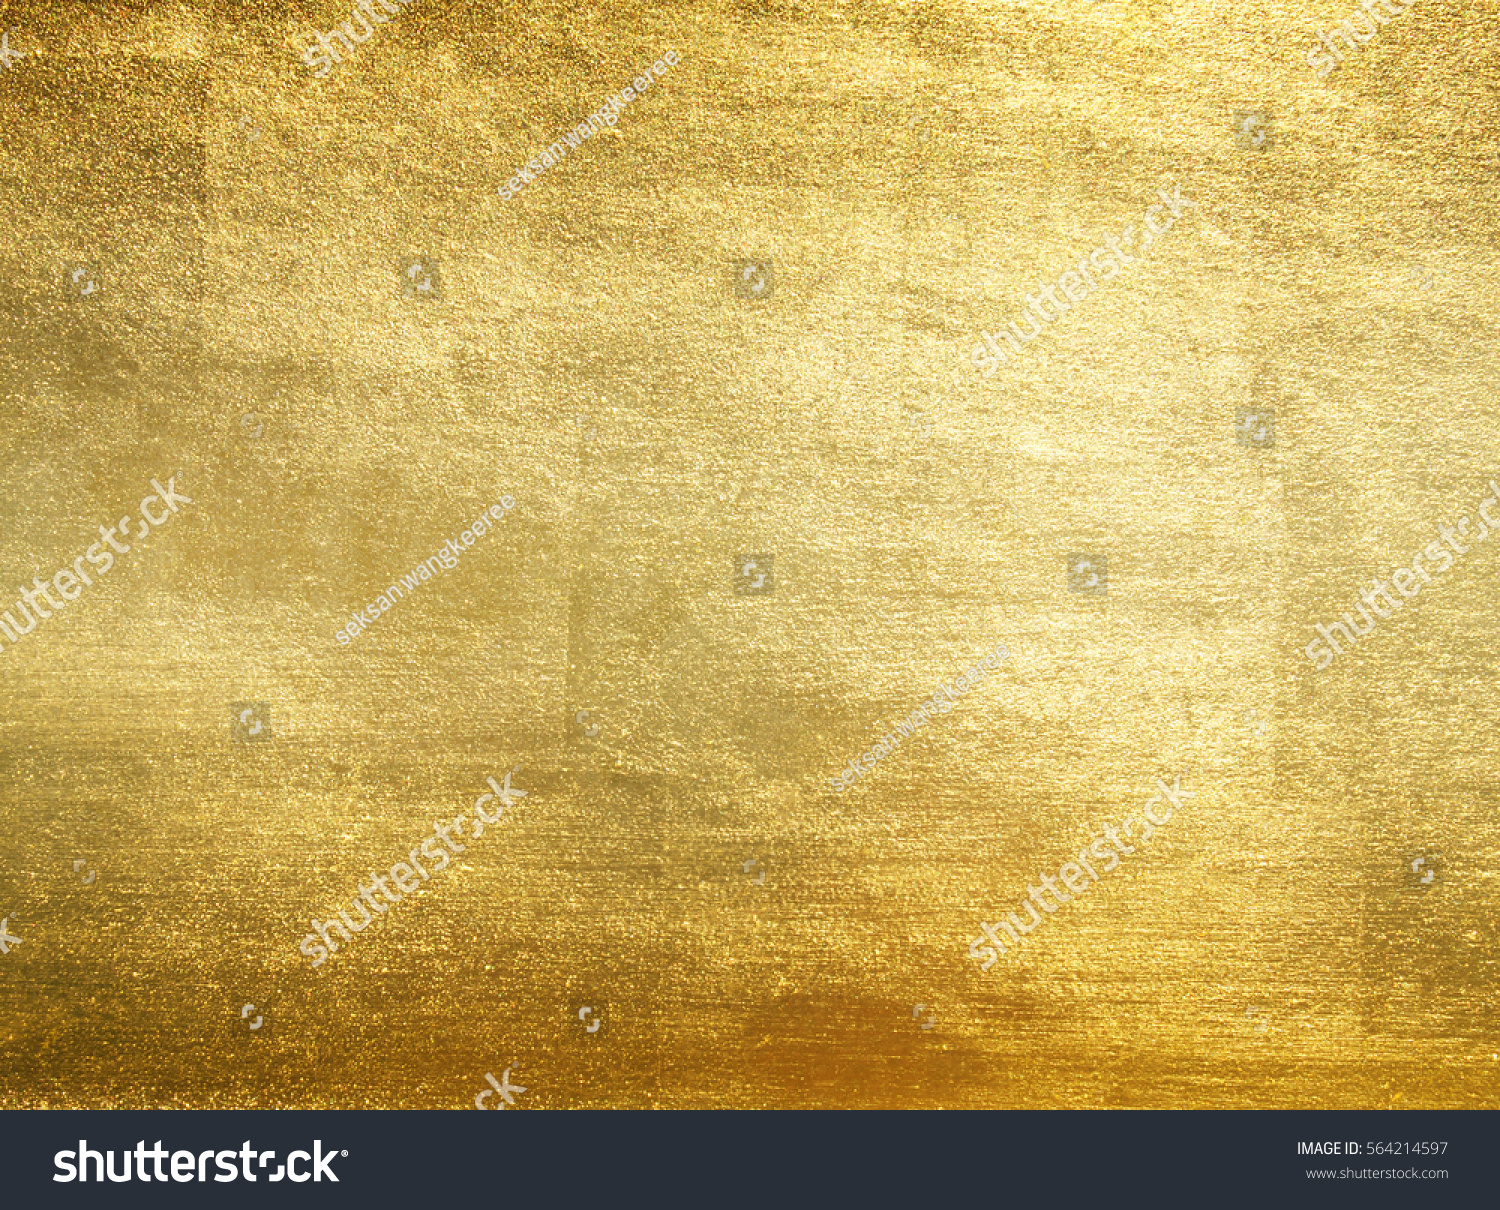 Shiny yellow leaf gold foil texture background #564214597